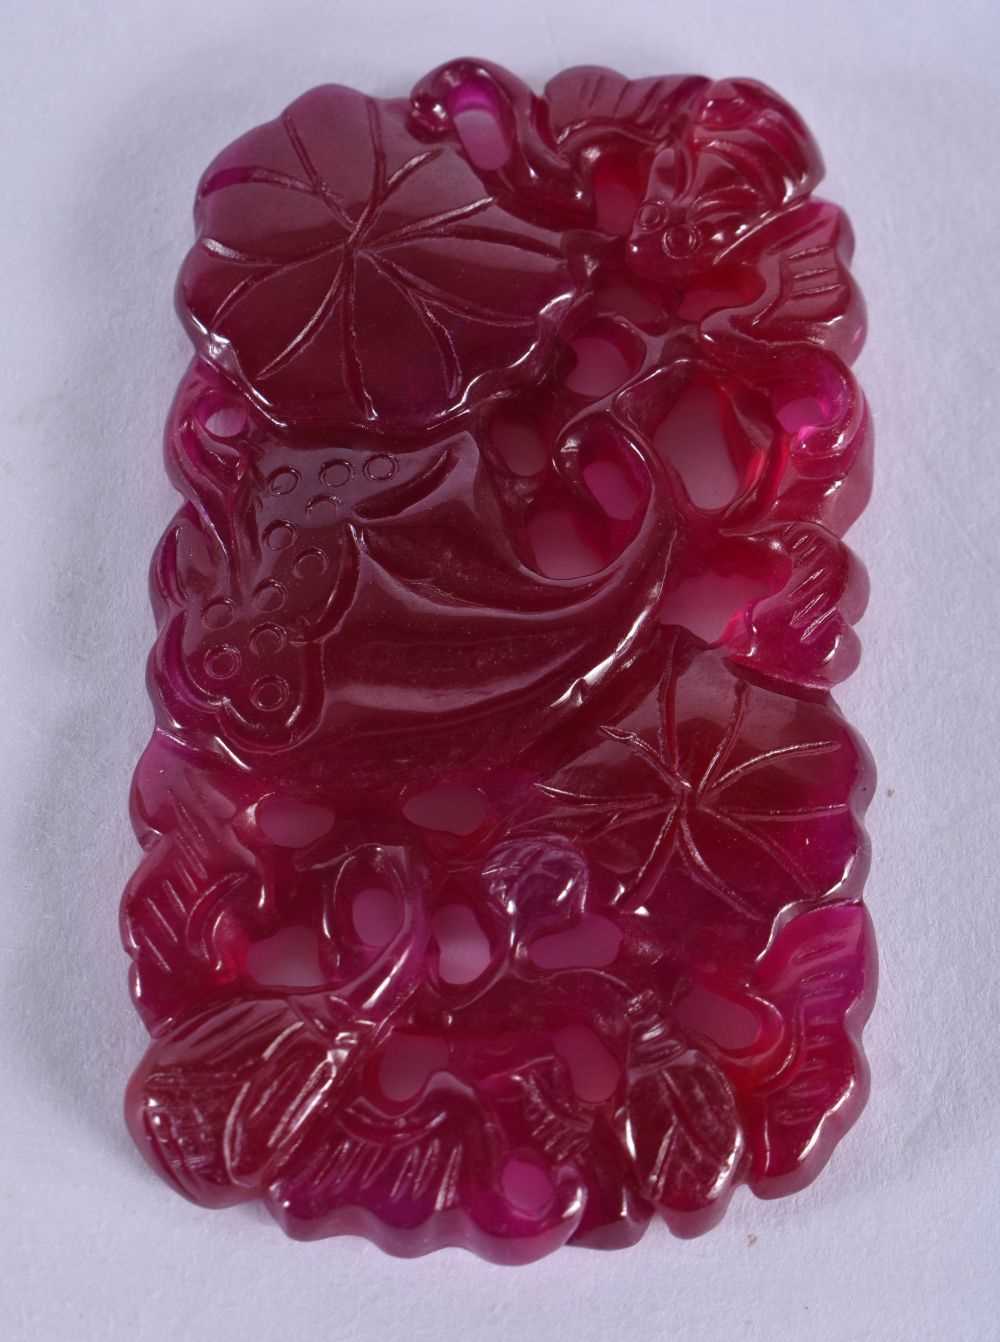 A CHINESE CARVED TOURMALINE PLAQUE 20th Century. 34.9 grams. 4.25cm x 7.25cm.